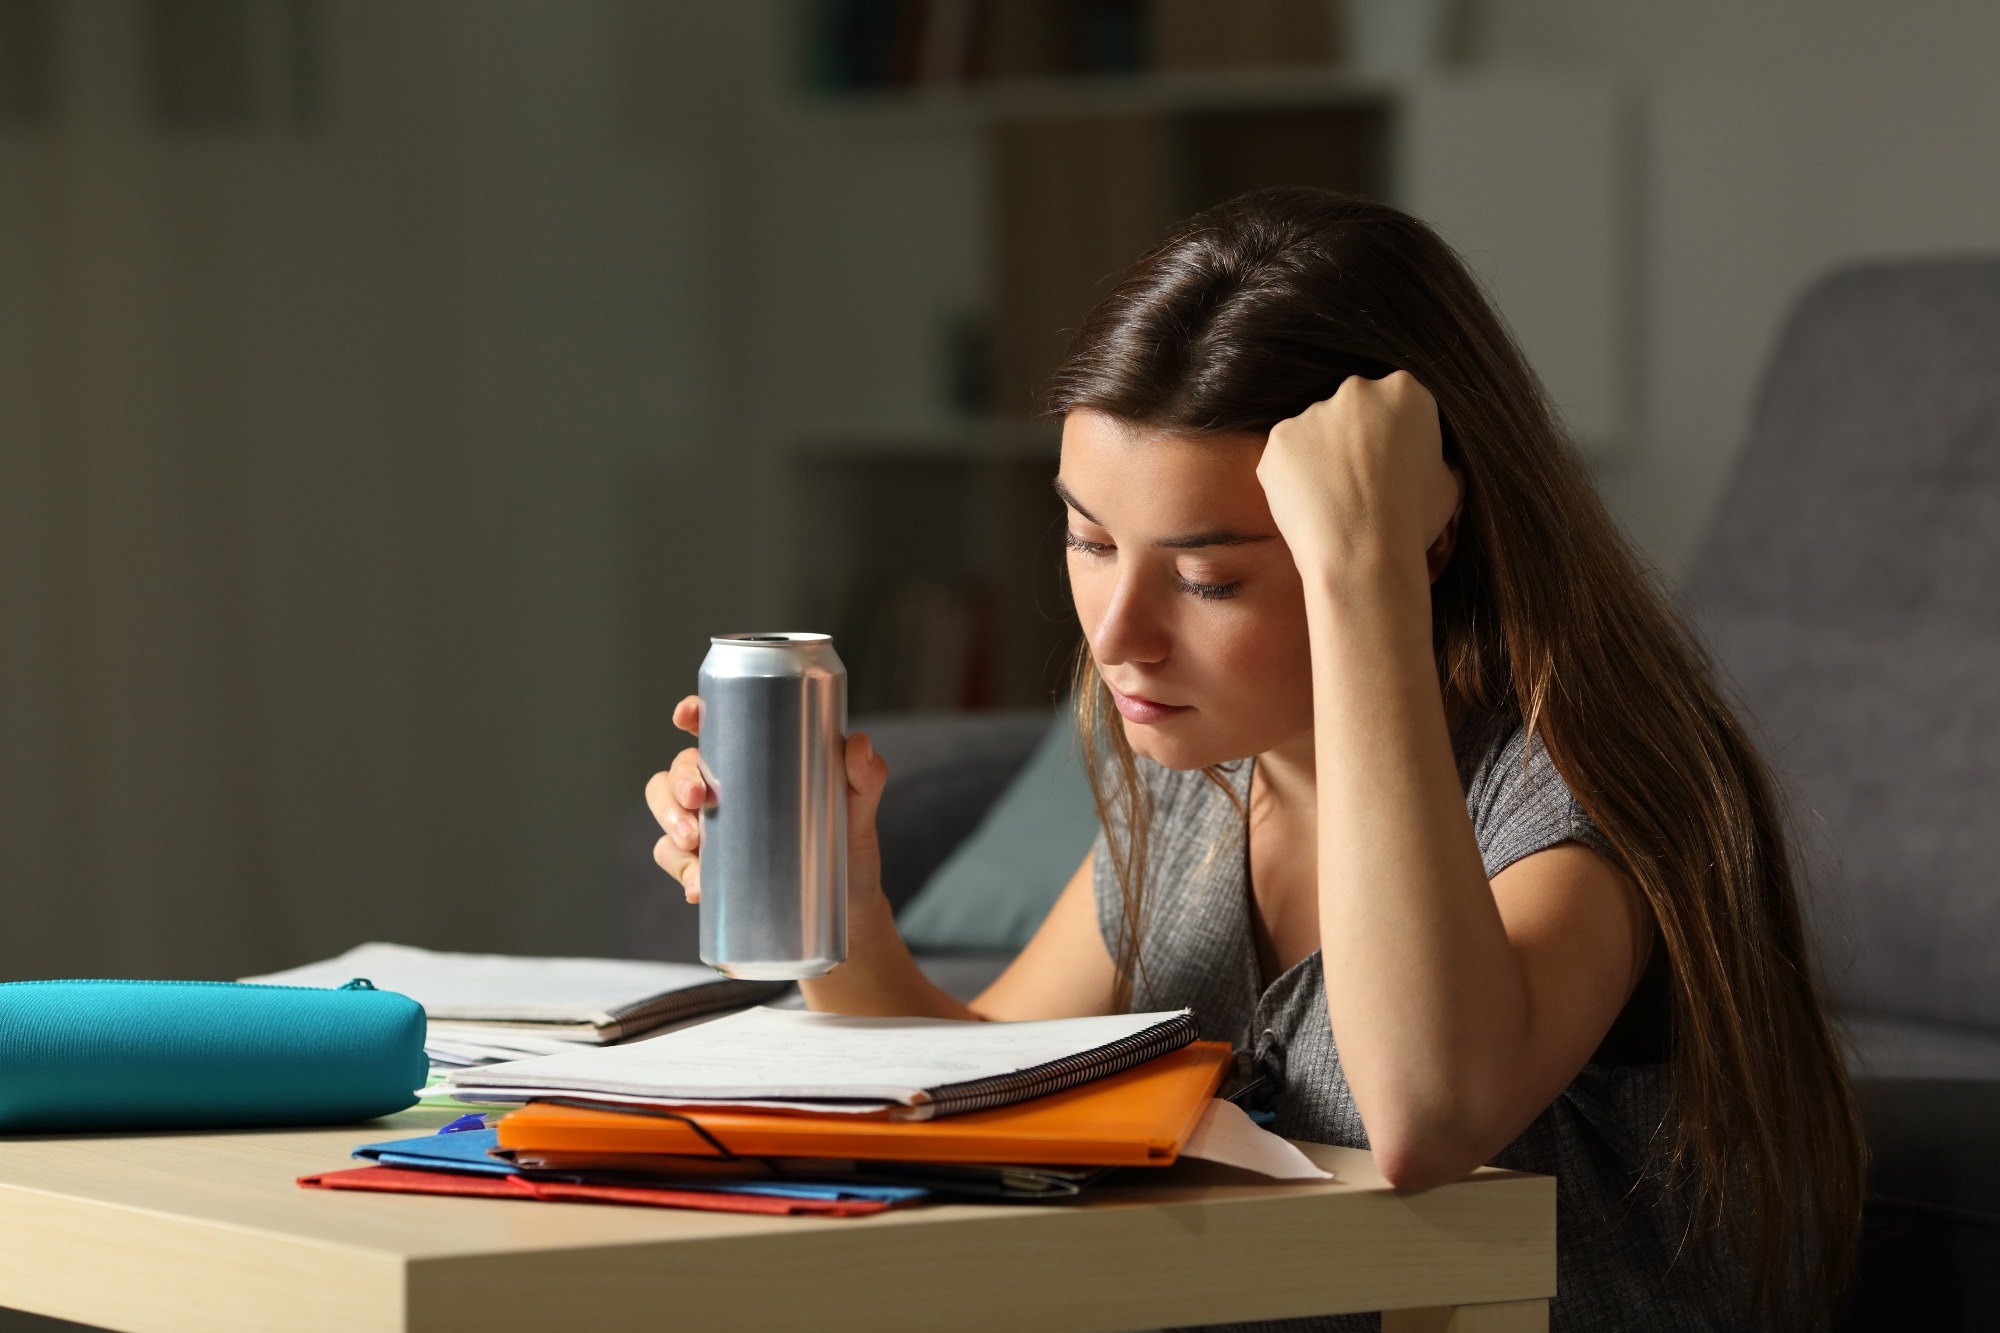 Students are studying and drinking an energy drink